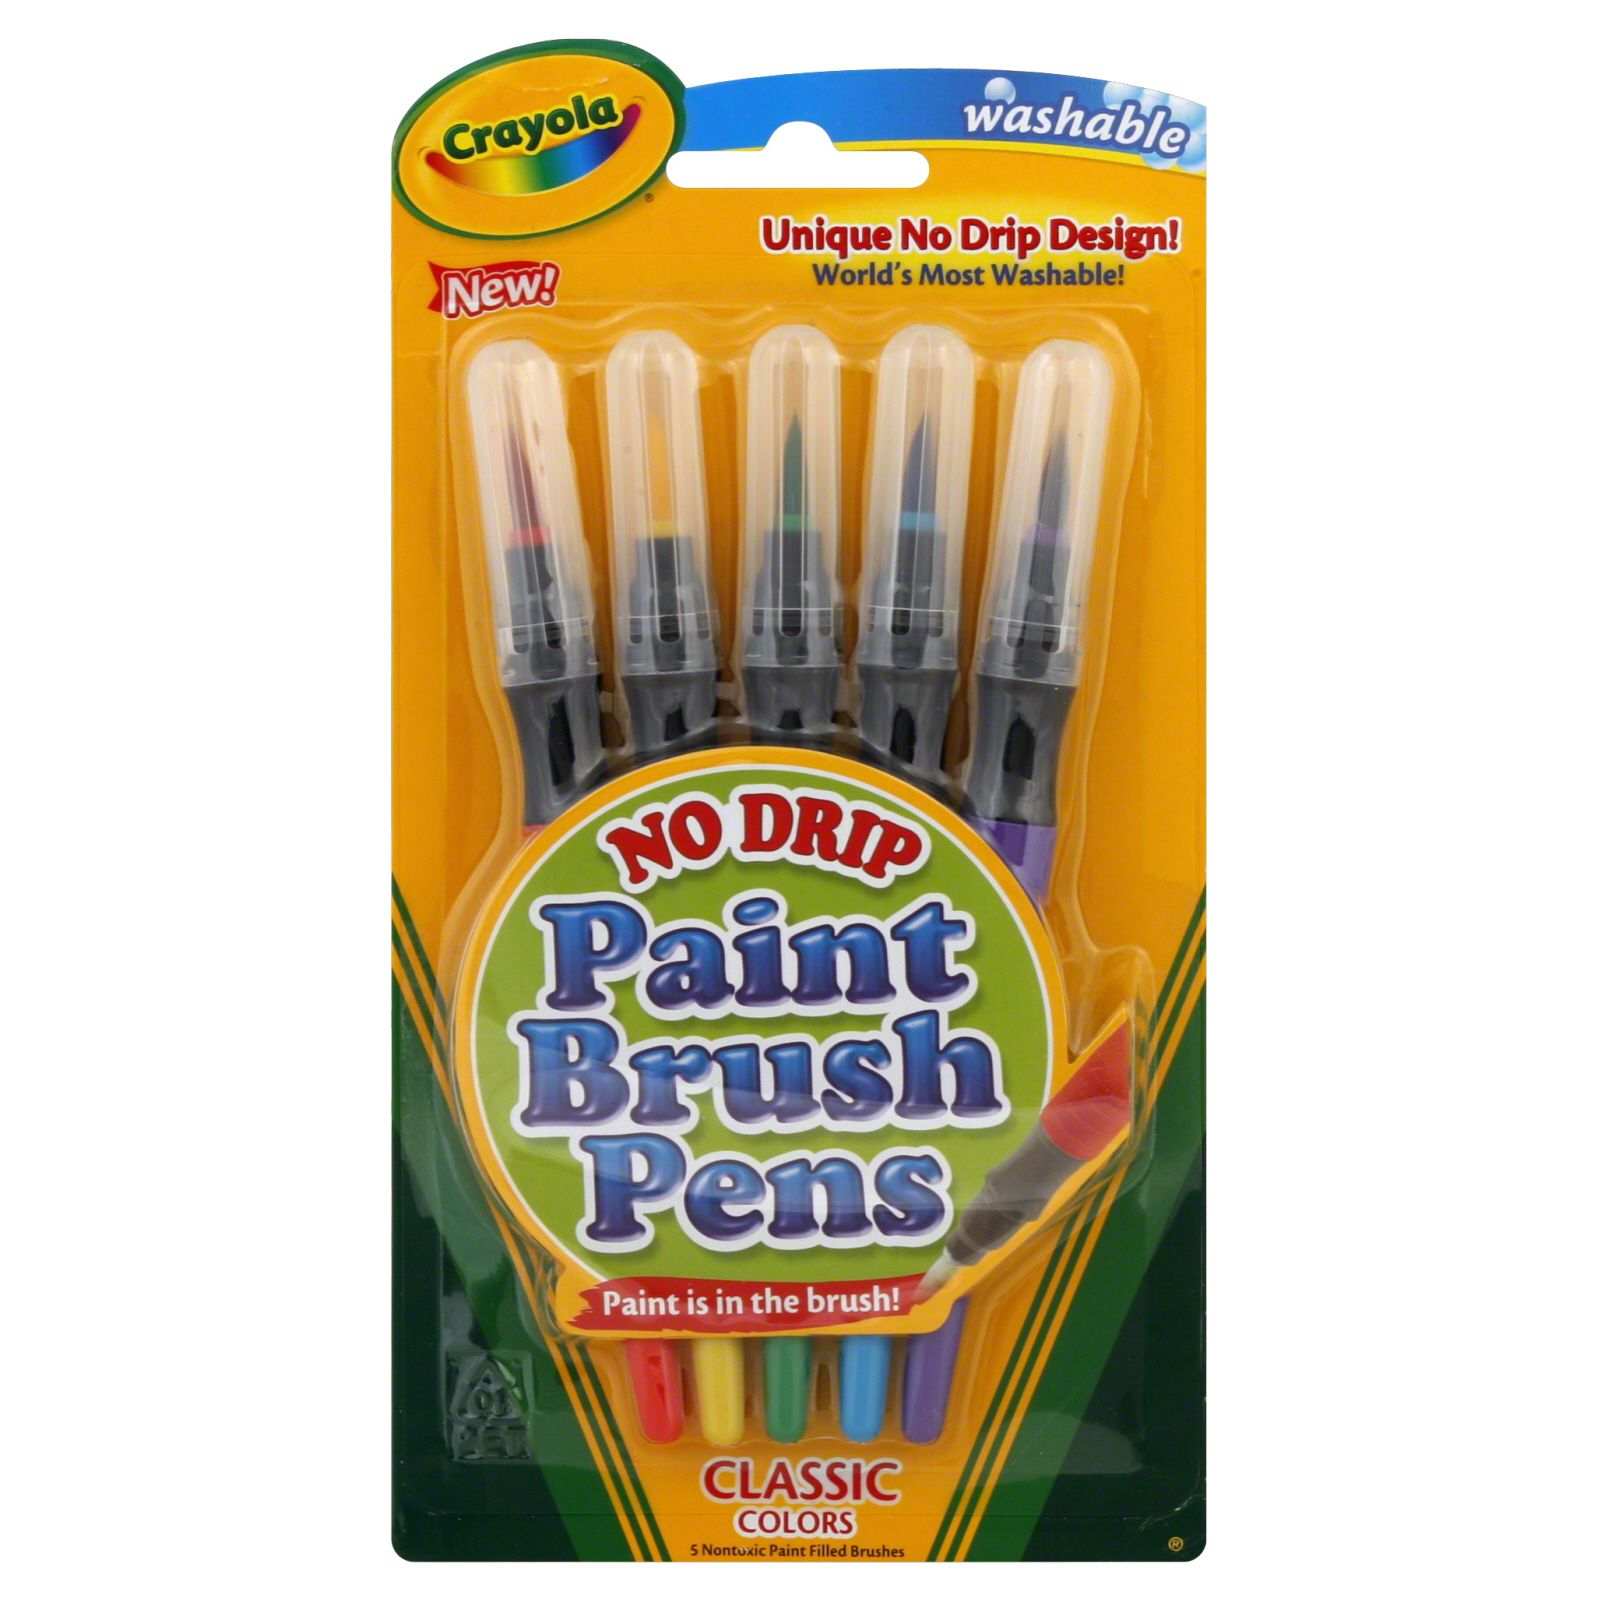 Crayola Paint Brush Pens, No Drip, Classic Colors, 5 brushes